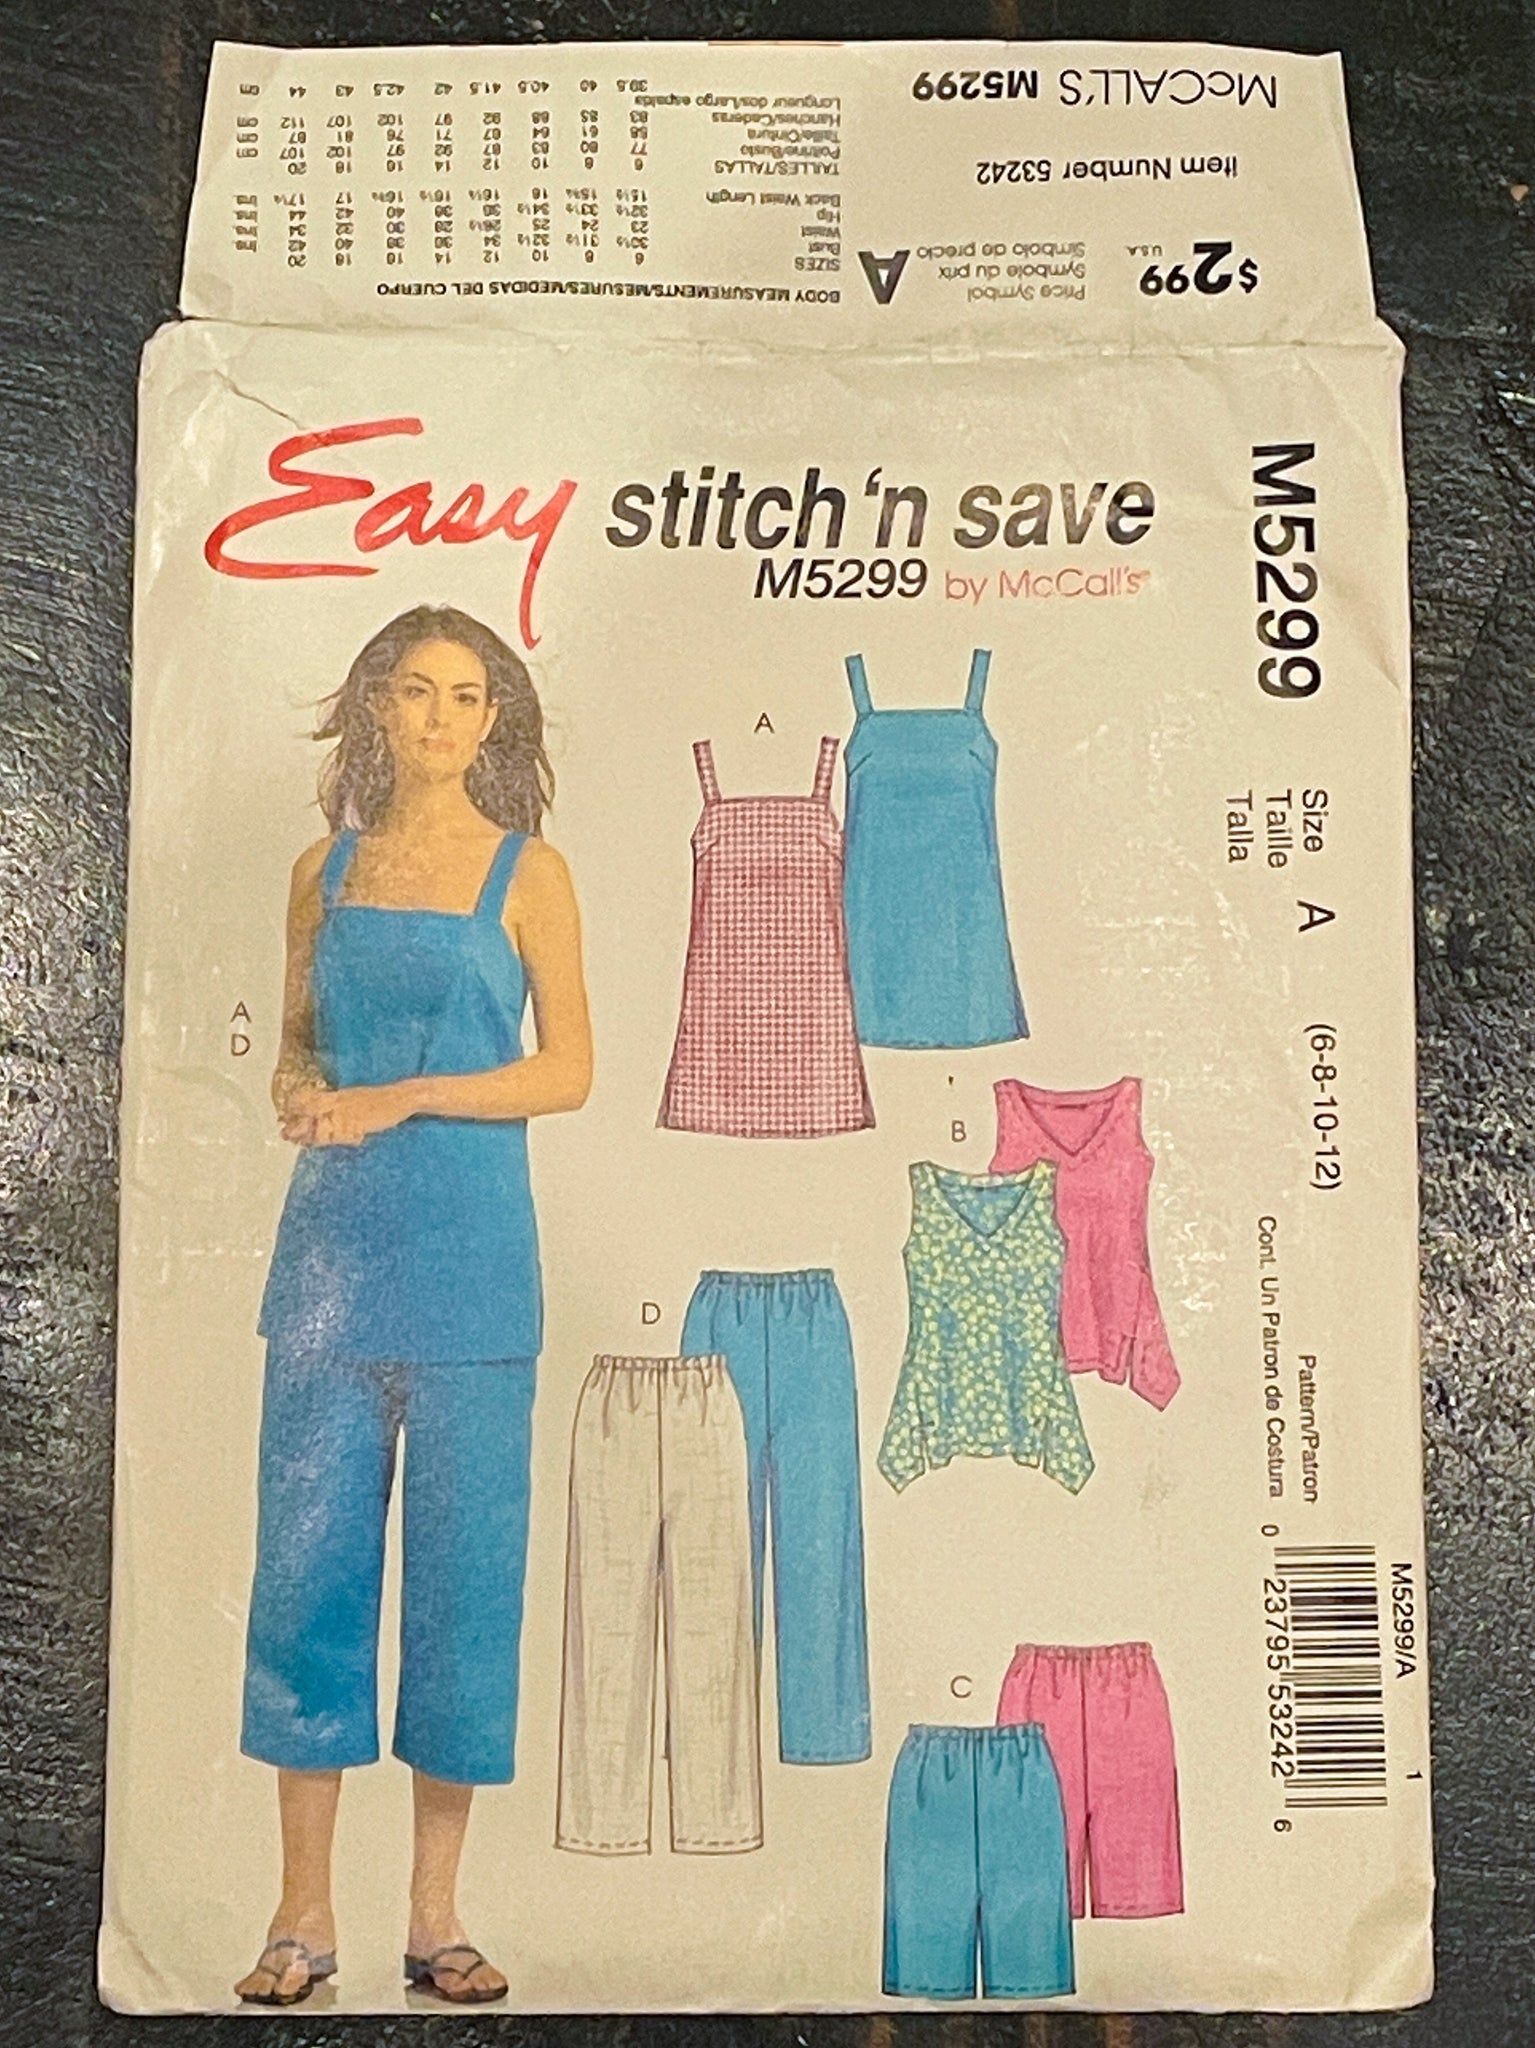 SALE 2007 McCall's 5299 Pattern - Women's Tunic, Top, Shorts and Pants